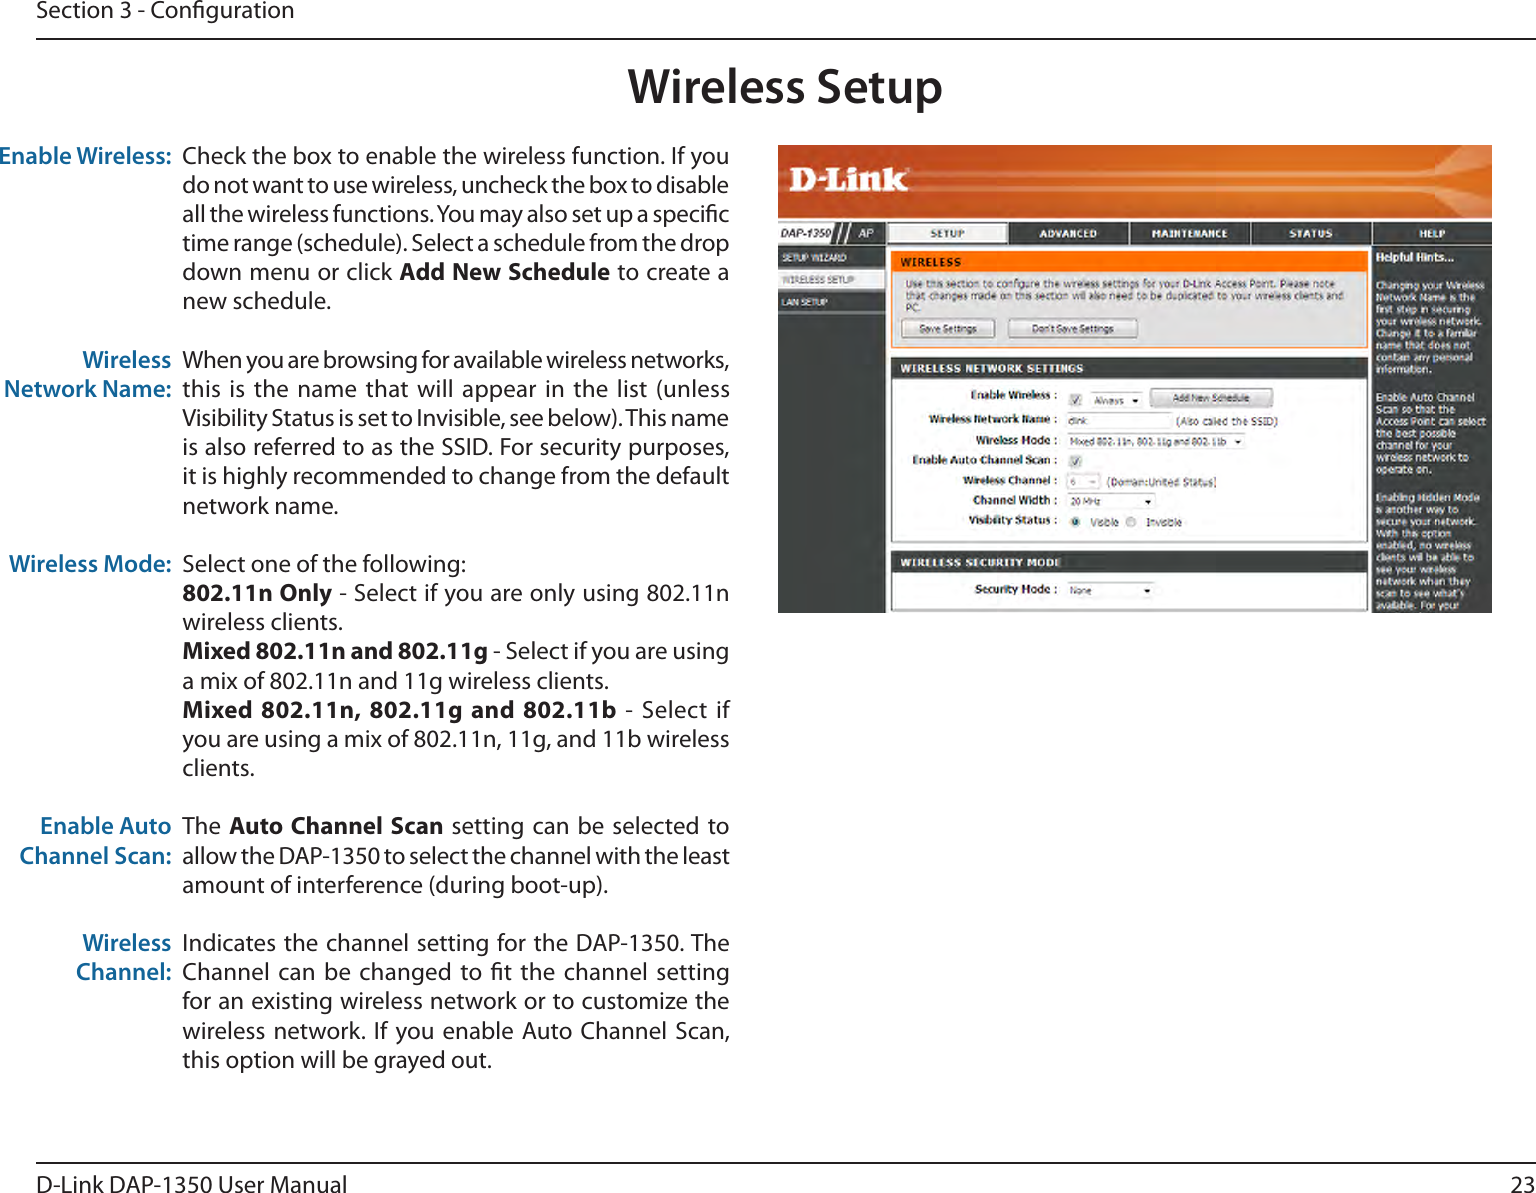 23D-Link DAP-1350 User ManualSection 3 - CongurationEnable Wireless:Wireless Network Name:Wireless Mode: Enable Auto Channel Scan:Wireless Channel:    Check the box to enable the wireless function. If you do not want to use wireless, uncheck the box to disable all the wireless functions. You may also set up a specic time range (schedule). Select a schedule from the drop down menu or click Add New Schedule to create a new schedule. When you are browsing for available wireless networks, this is  the name  that will  appear in  the list  (unless Visibility Status is set to Invisible, see below). This name is also referred to as the SSID. For security purposes, it is highly recommended to change from the default network name.Select one of the following:802.11n Only - Select if you are only using 802.11n wireless clients.Mixed 802.11n and 802.11g - Select if you are using a mix of 802.11n and 11g wireless clients.Mixed 802.11n, 802.11g  and 802.11b  -  Select  if you are using a mix of 802.11n, 11g, and 11b wireless clients.The Auto Channel Scan  setting can  be selected to allow the DAP-1350 to select the channel with the least amount of interference (during boot-up). Indicates the channel setting for the DAP-1350. The Channel can  be changed  to t the channel  setting for an existing wireless network or to customize the wireless network.  If  you enable Auto Channel  Scan, this option will be grayed out.Wireless Setup